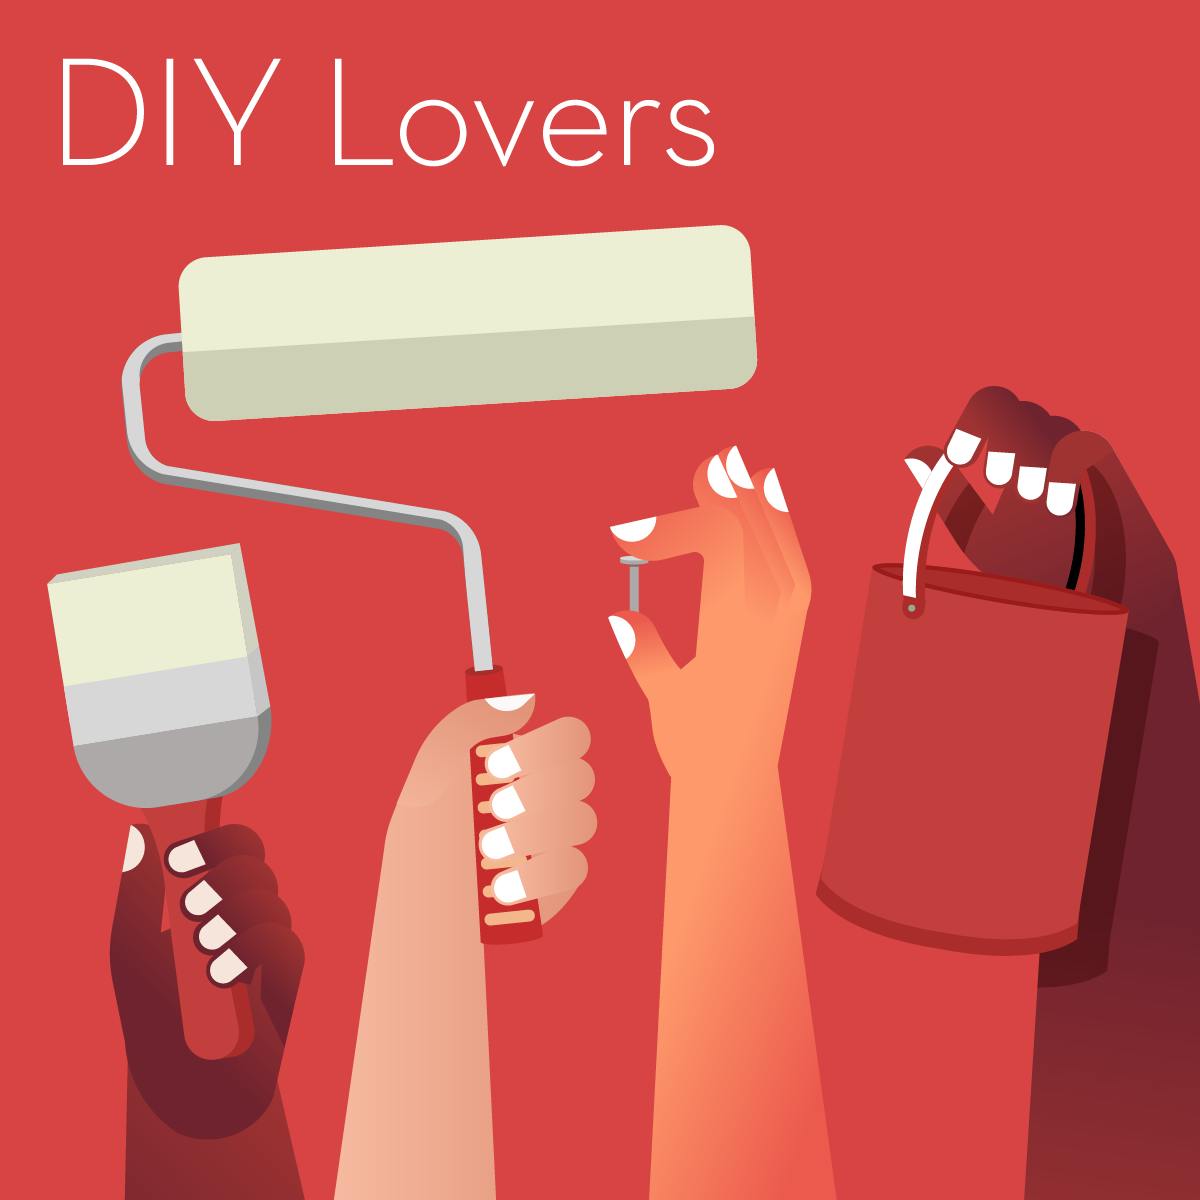 Best Presents for DIY Lovers